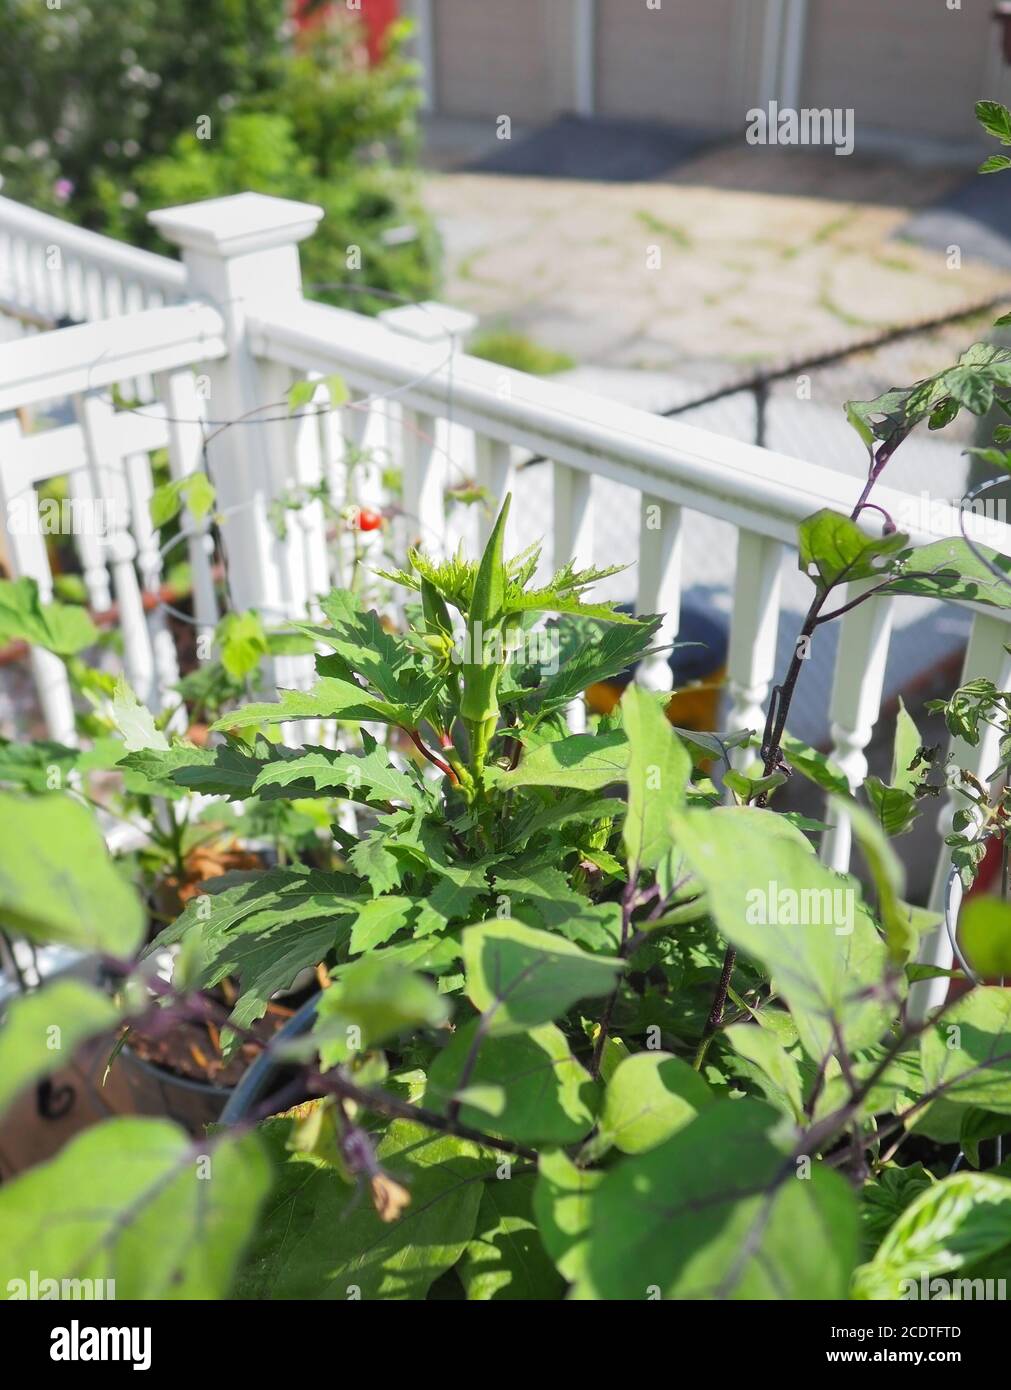 A beautiful okra plant of the Baby Bubba cultivar growing in a container garden on a balcony overlooking an urban alley. Stock Photo